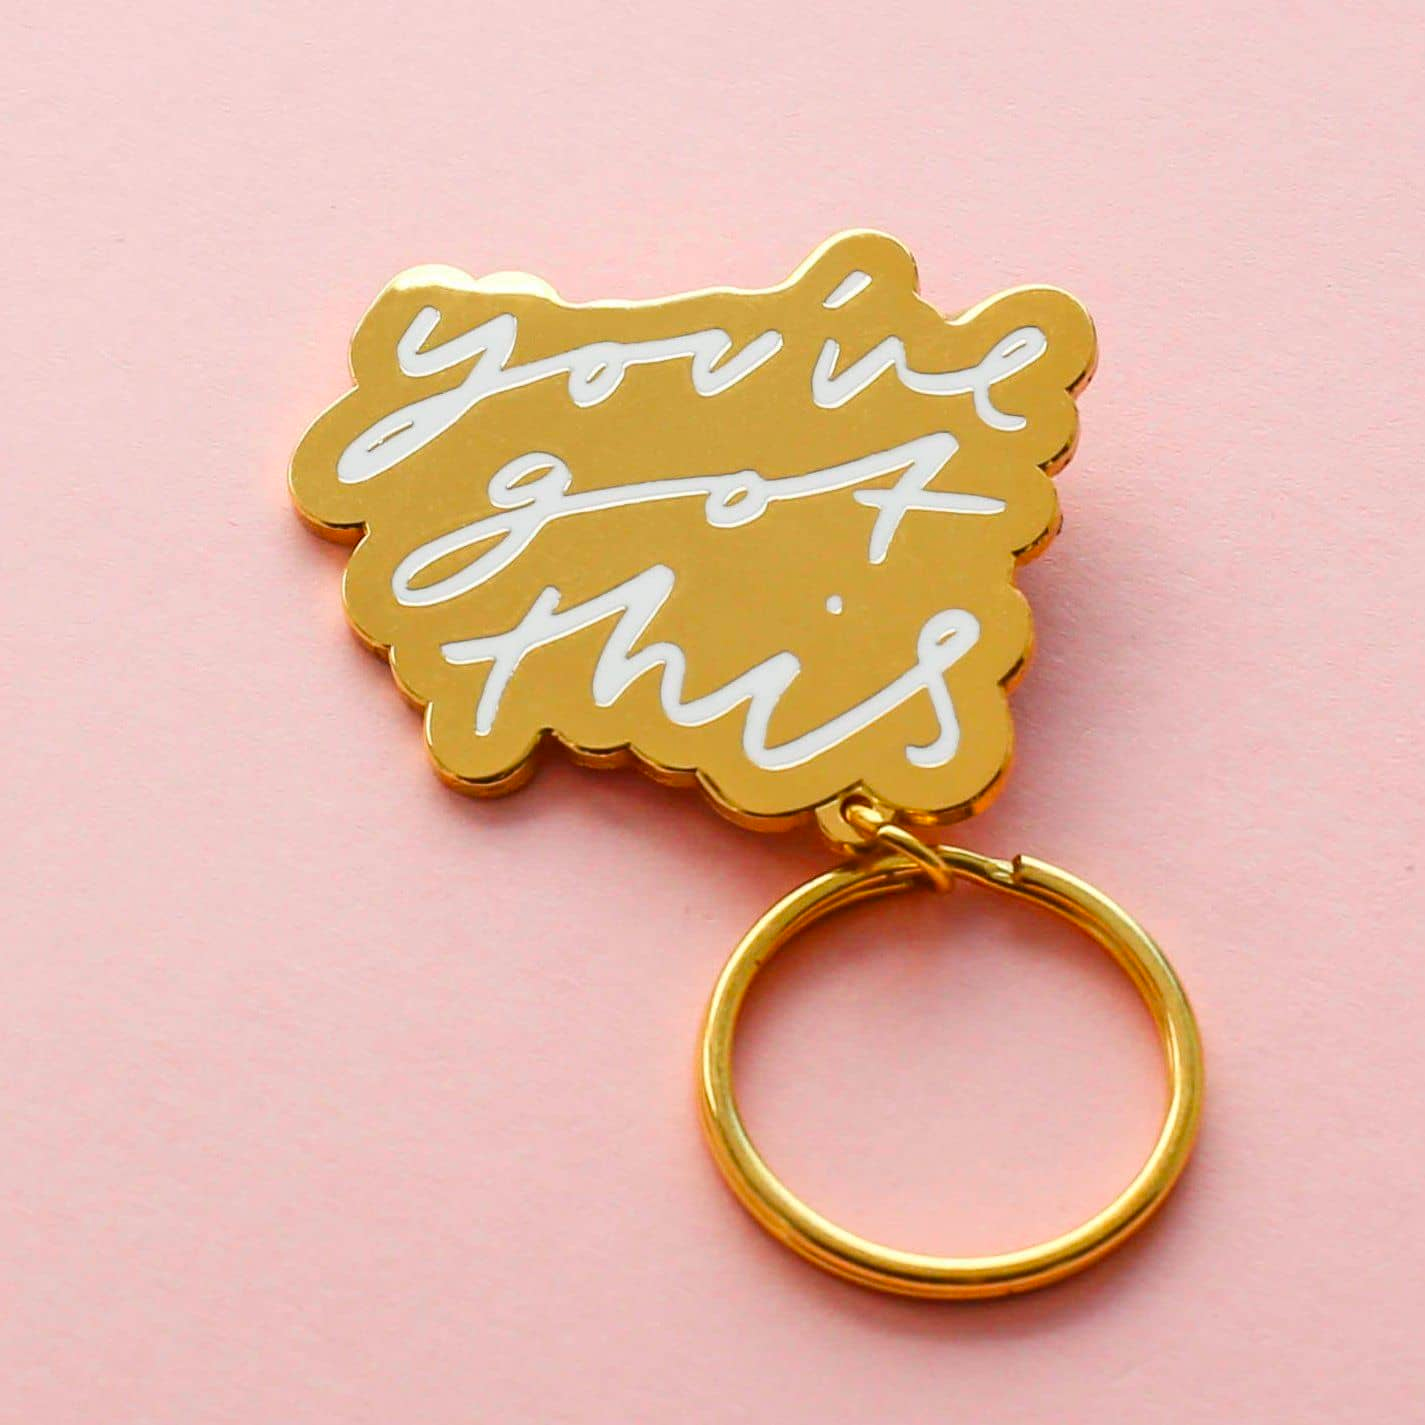 You've Got This Keychain